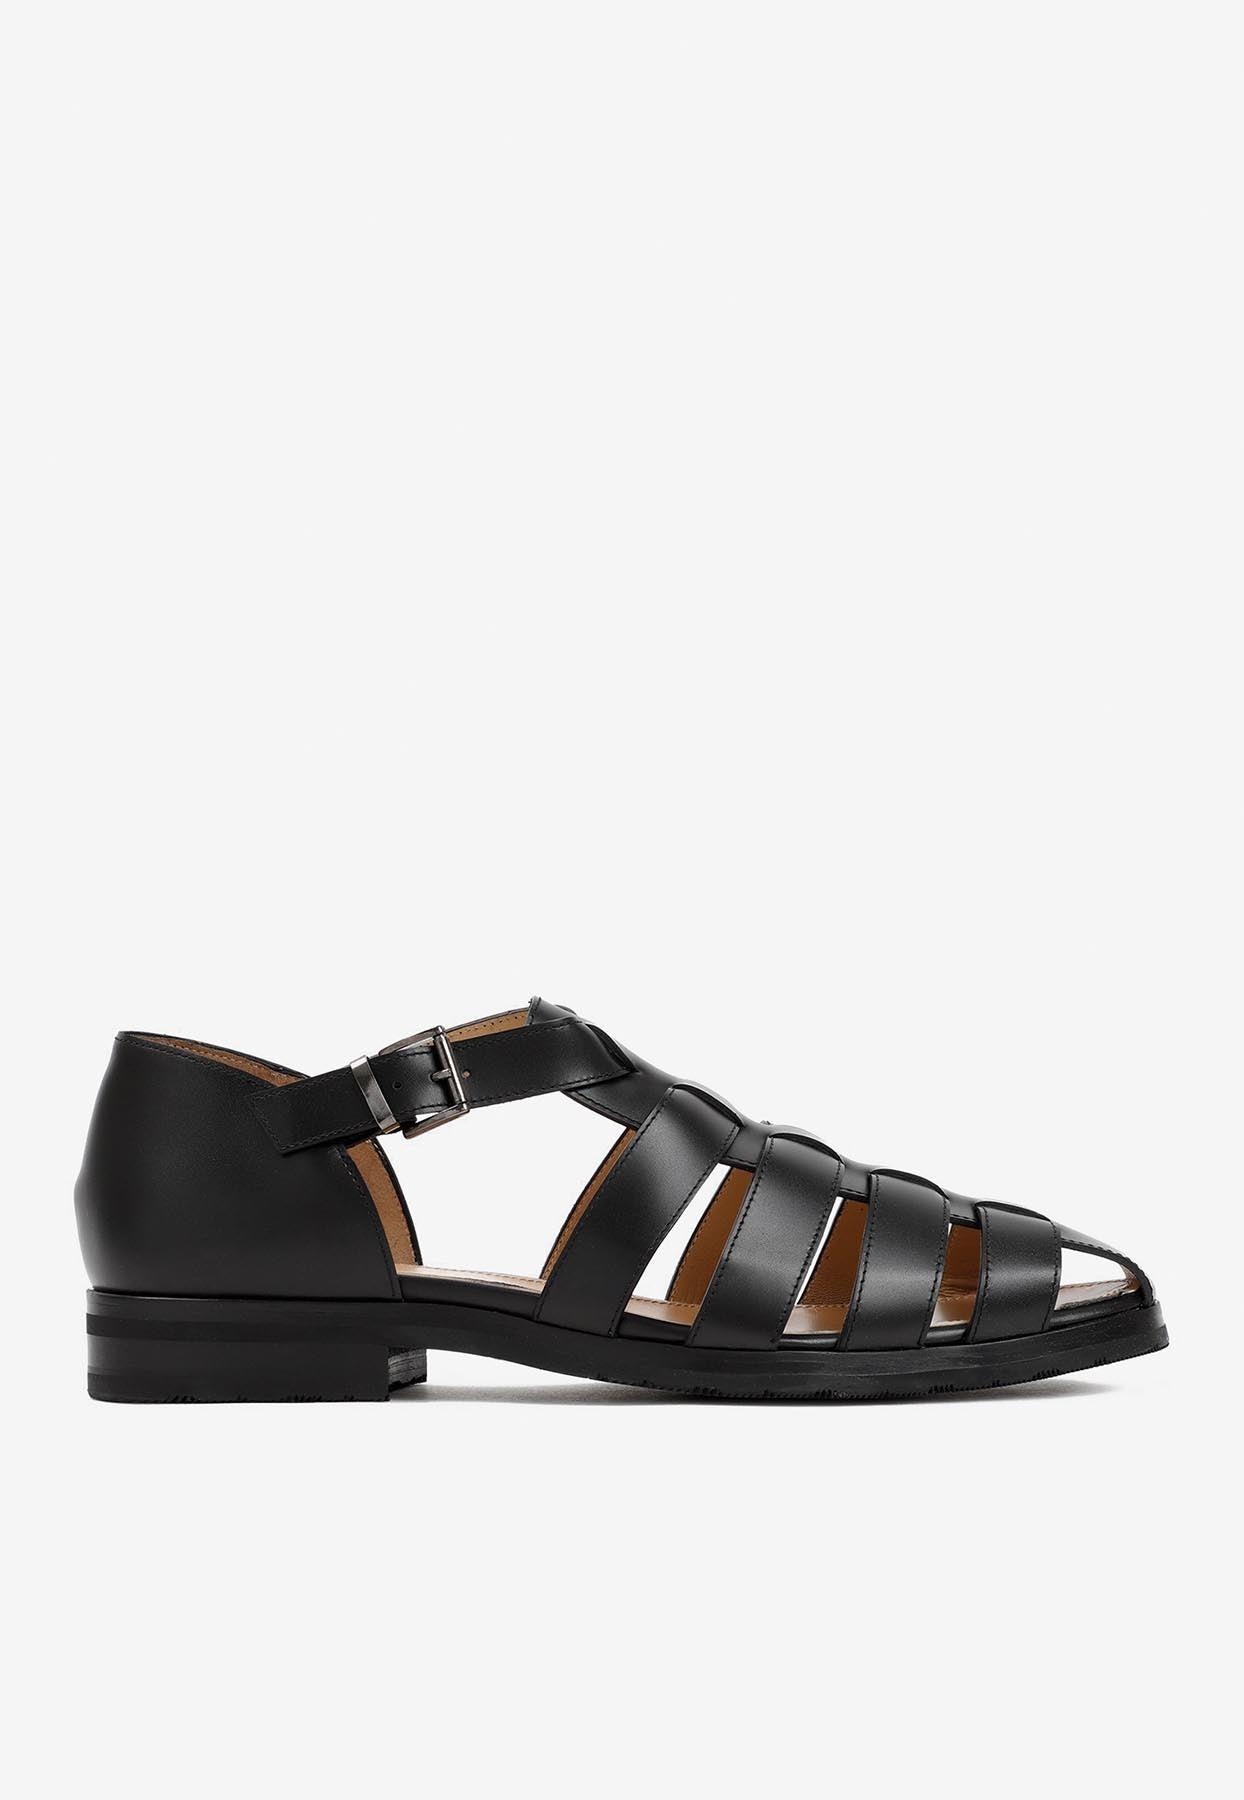 Paraboot Pacific Flat Sandals In Leather in Black for Men | Lyst